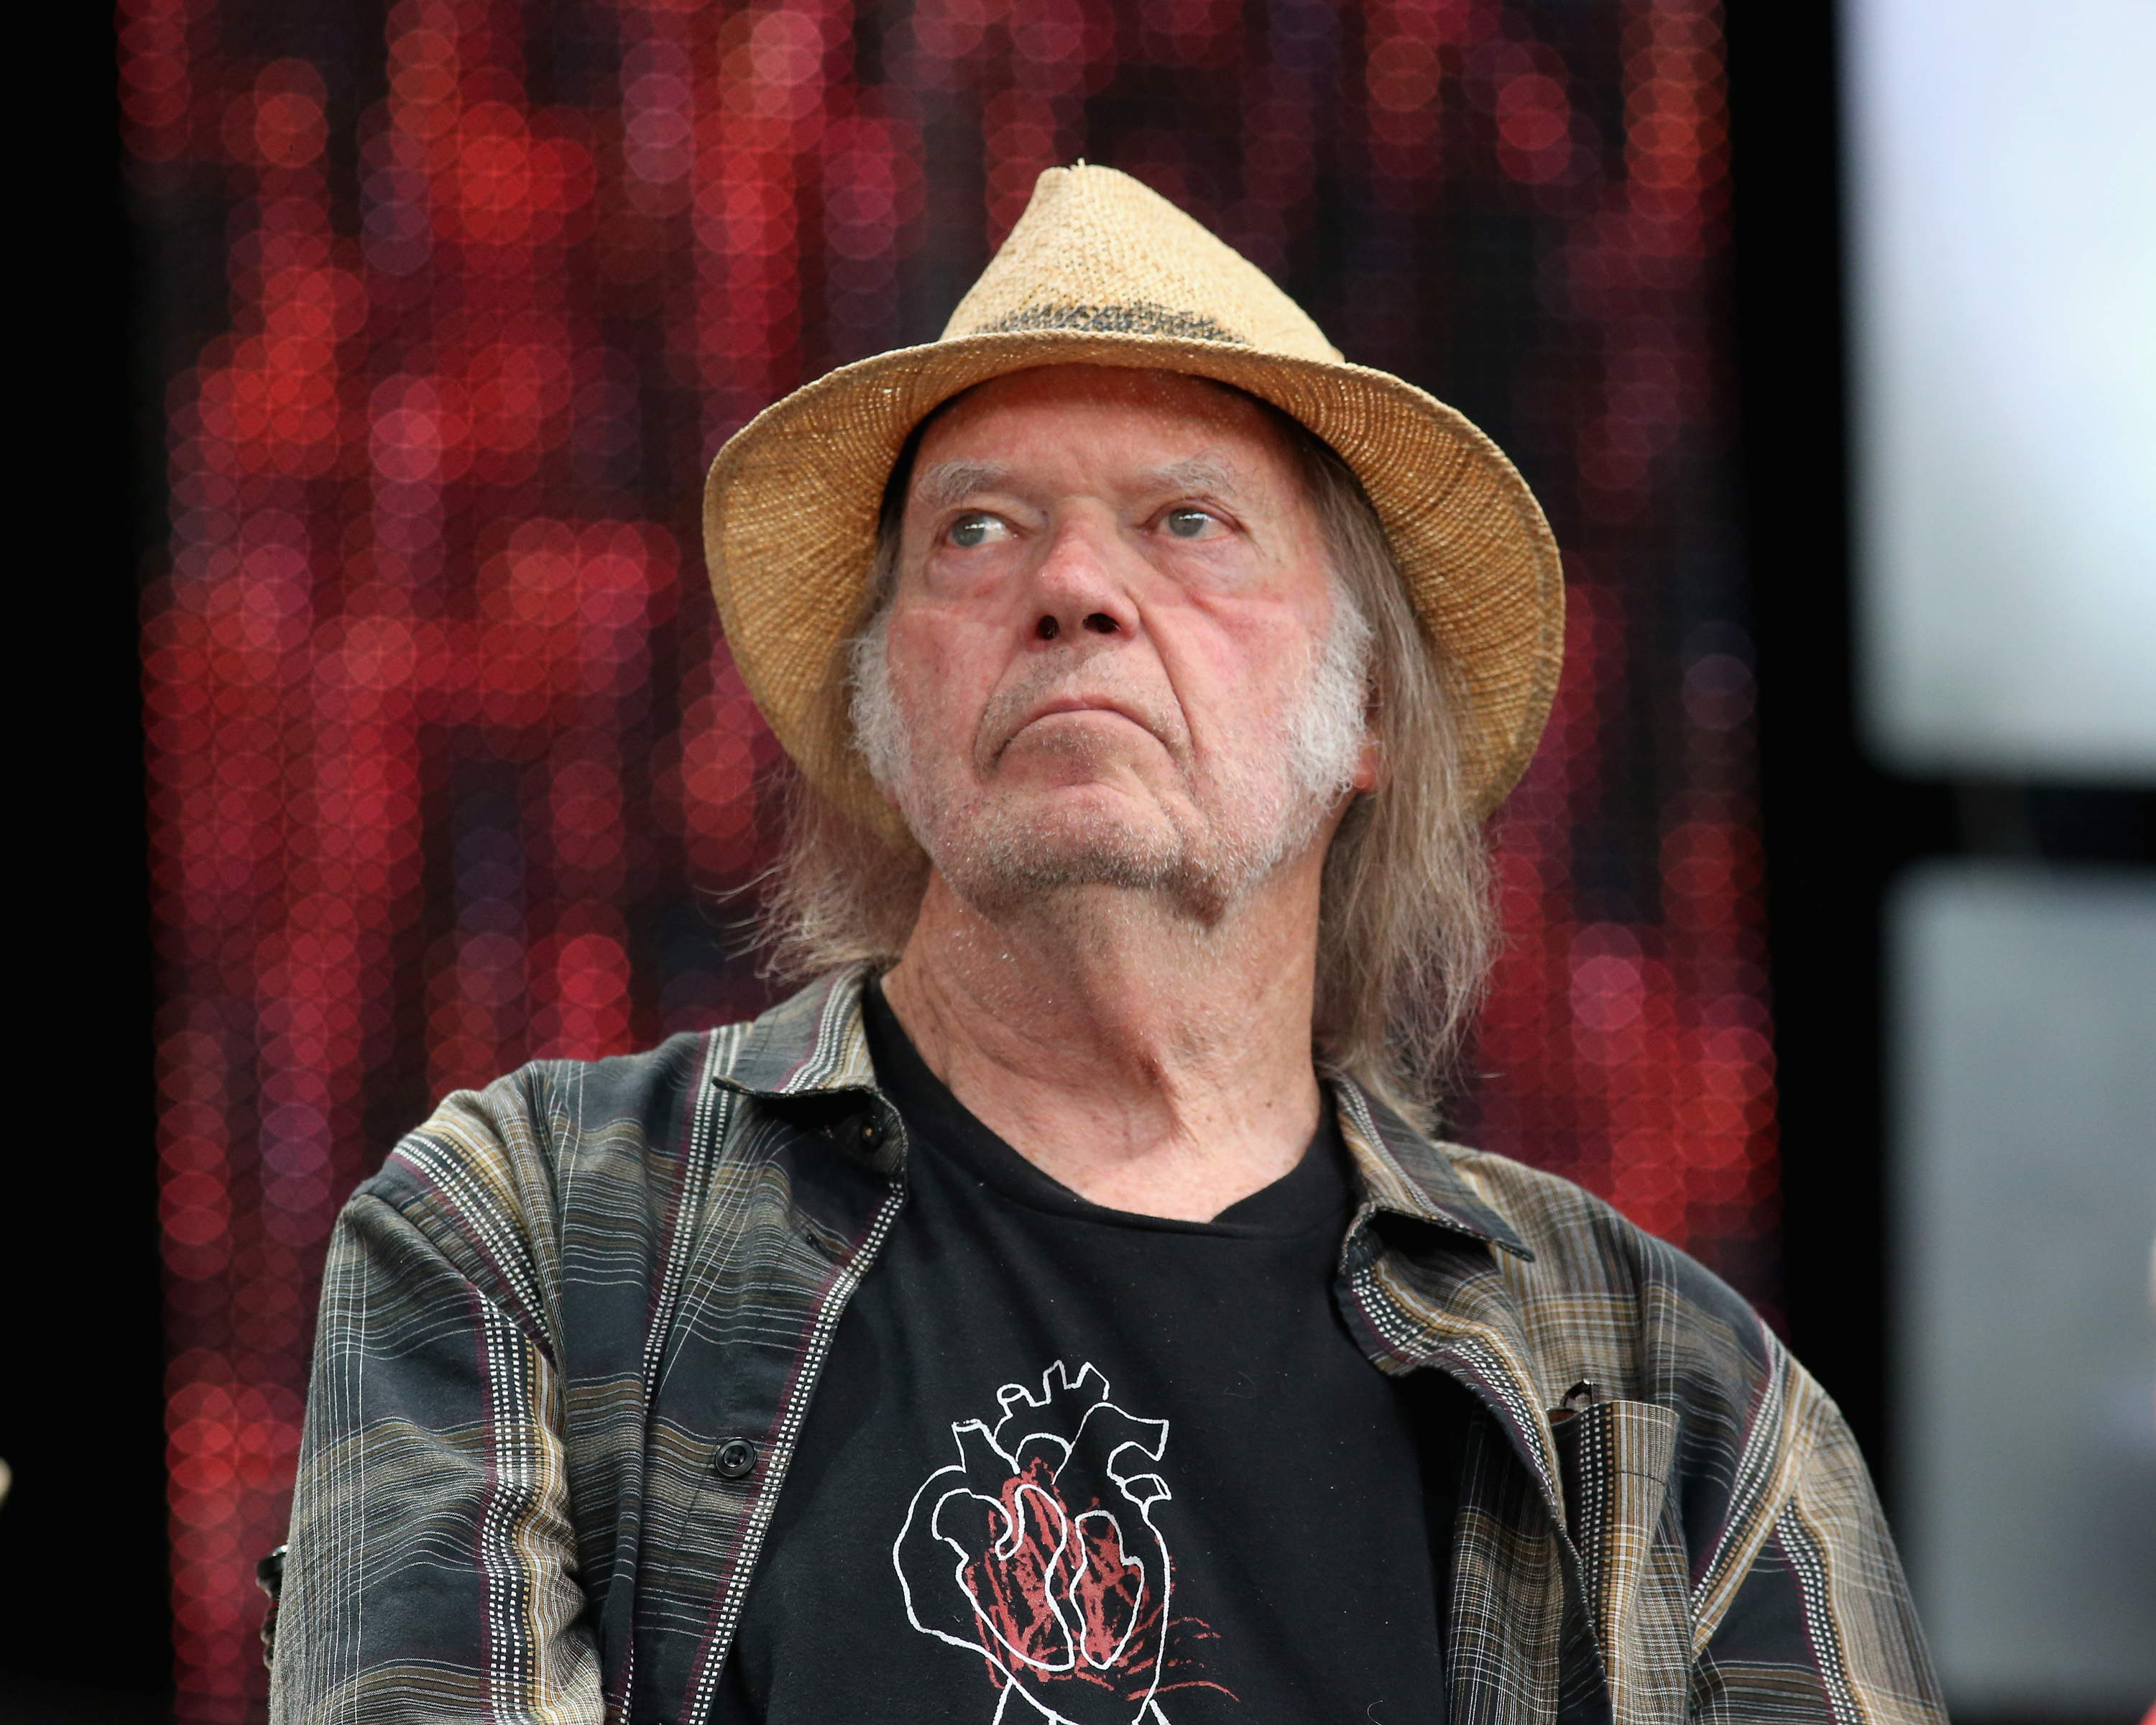 Spotify to Remove Neil Young's Music Over Joe Rogan Spat, Surgeon